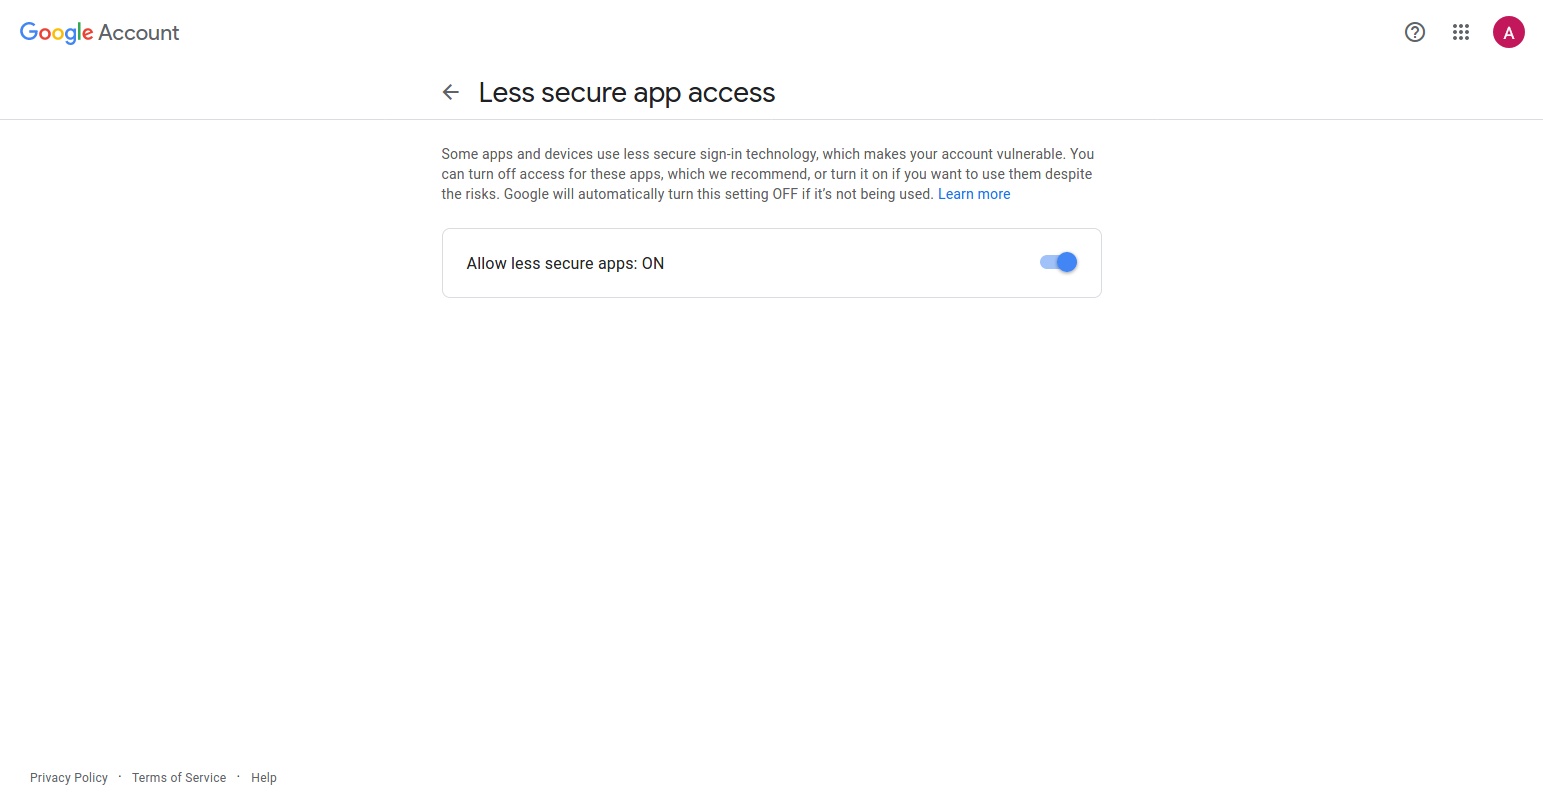 Google Account - Less secure apps access